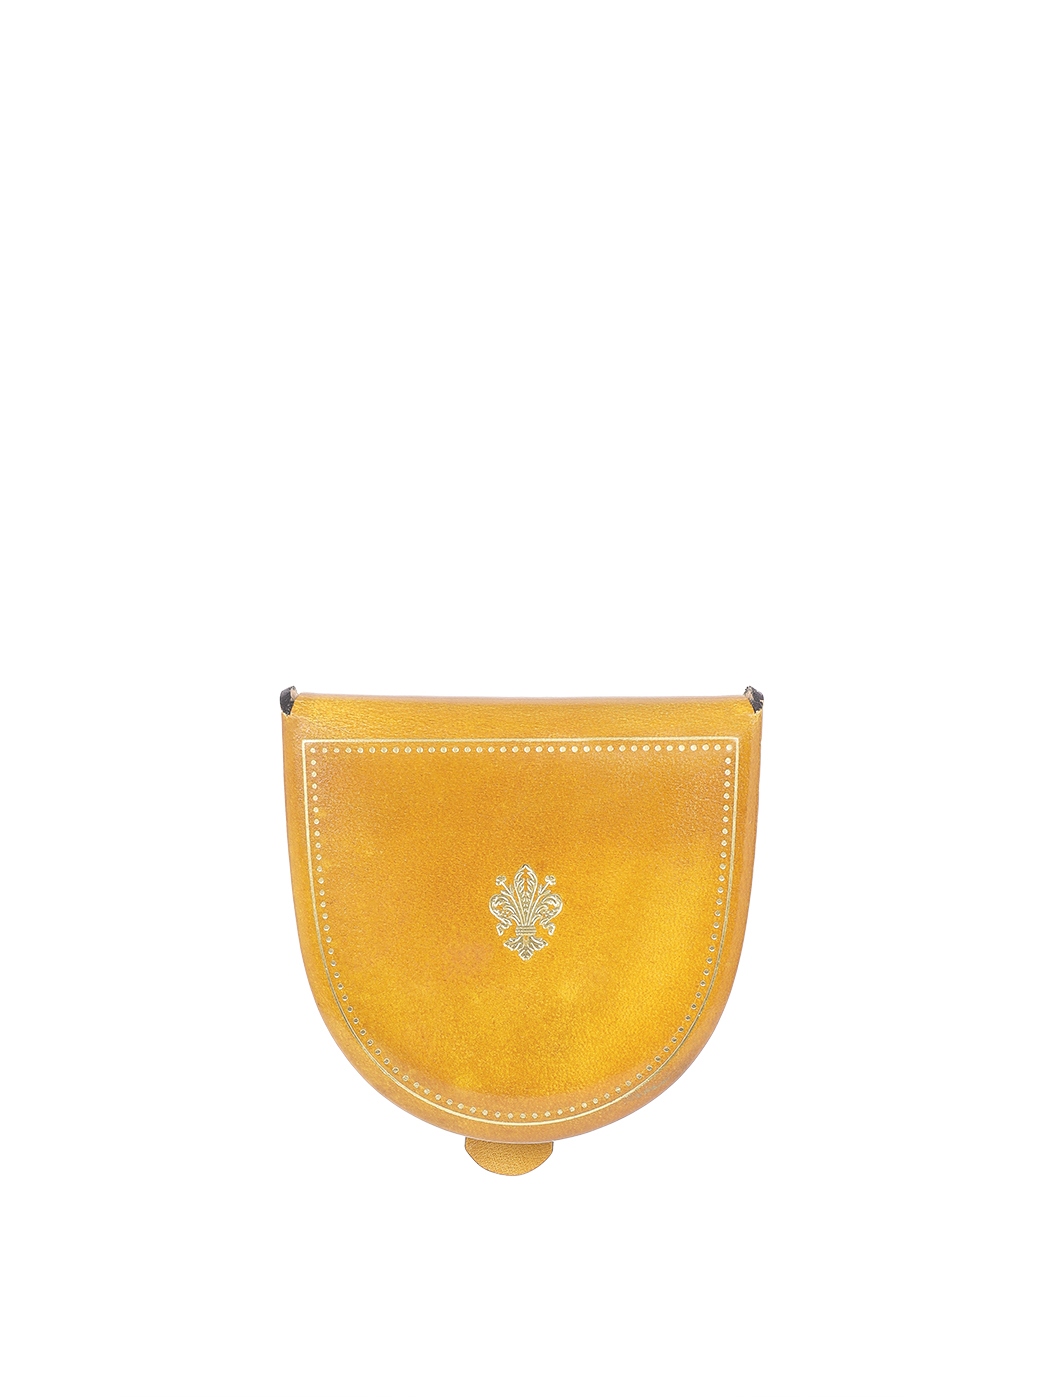 Florentine Lily Tacco Coin Pouch Yellow